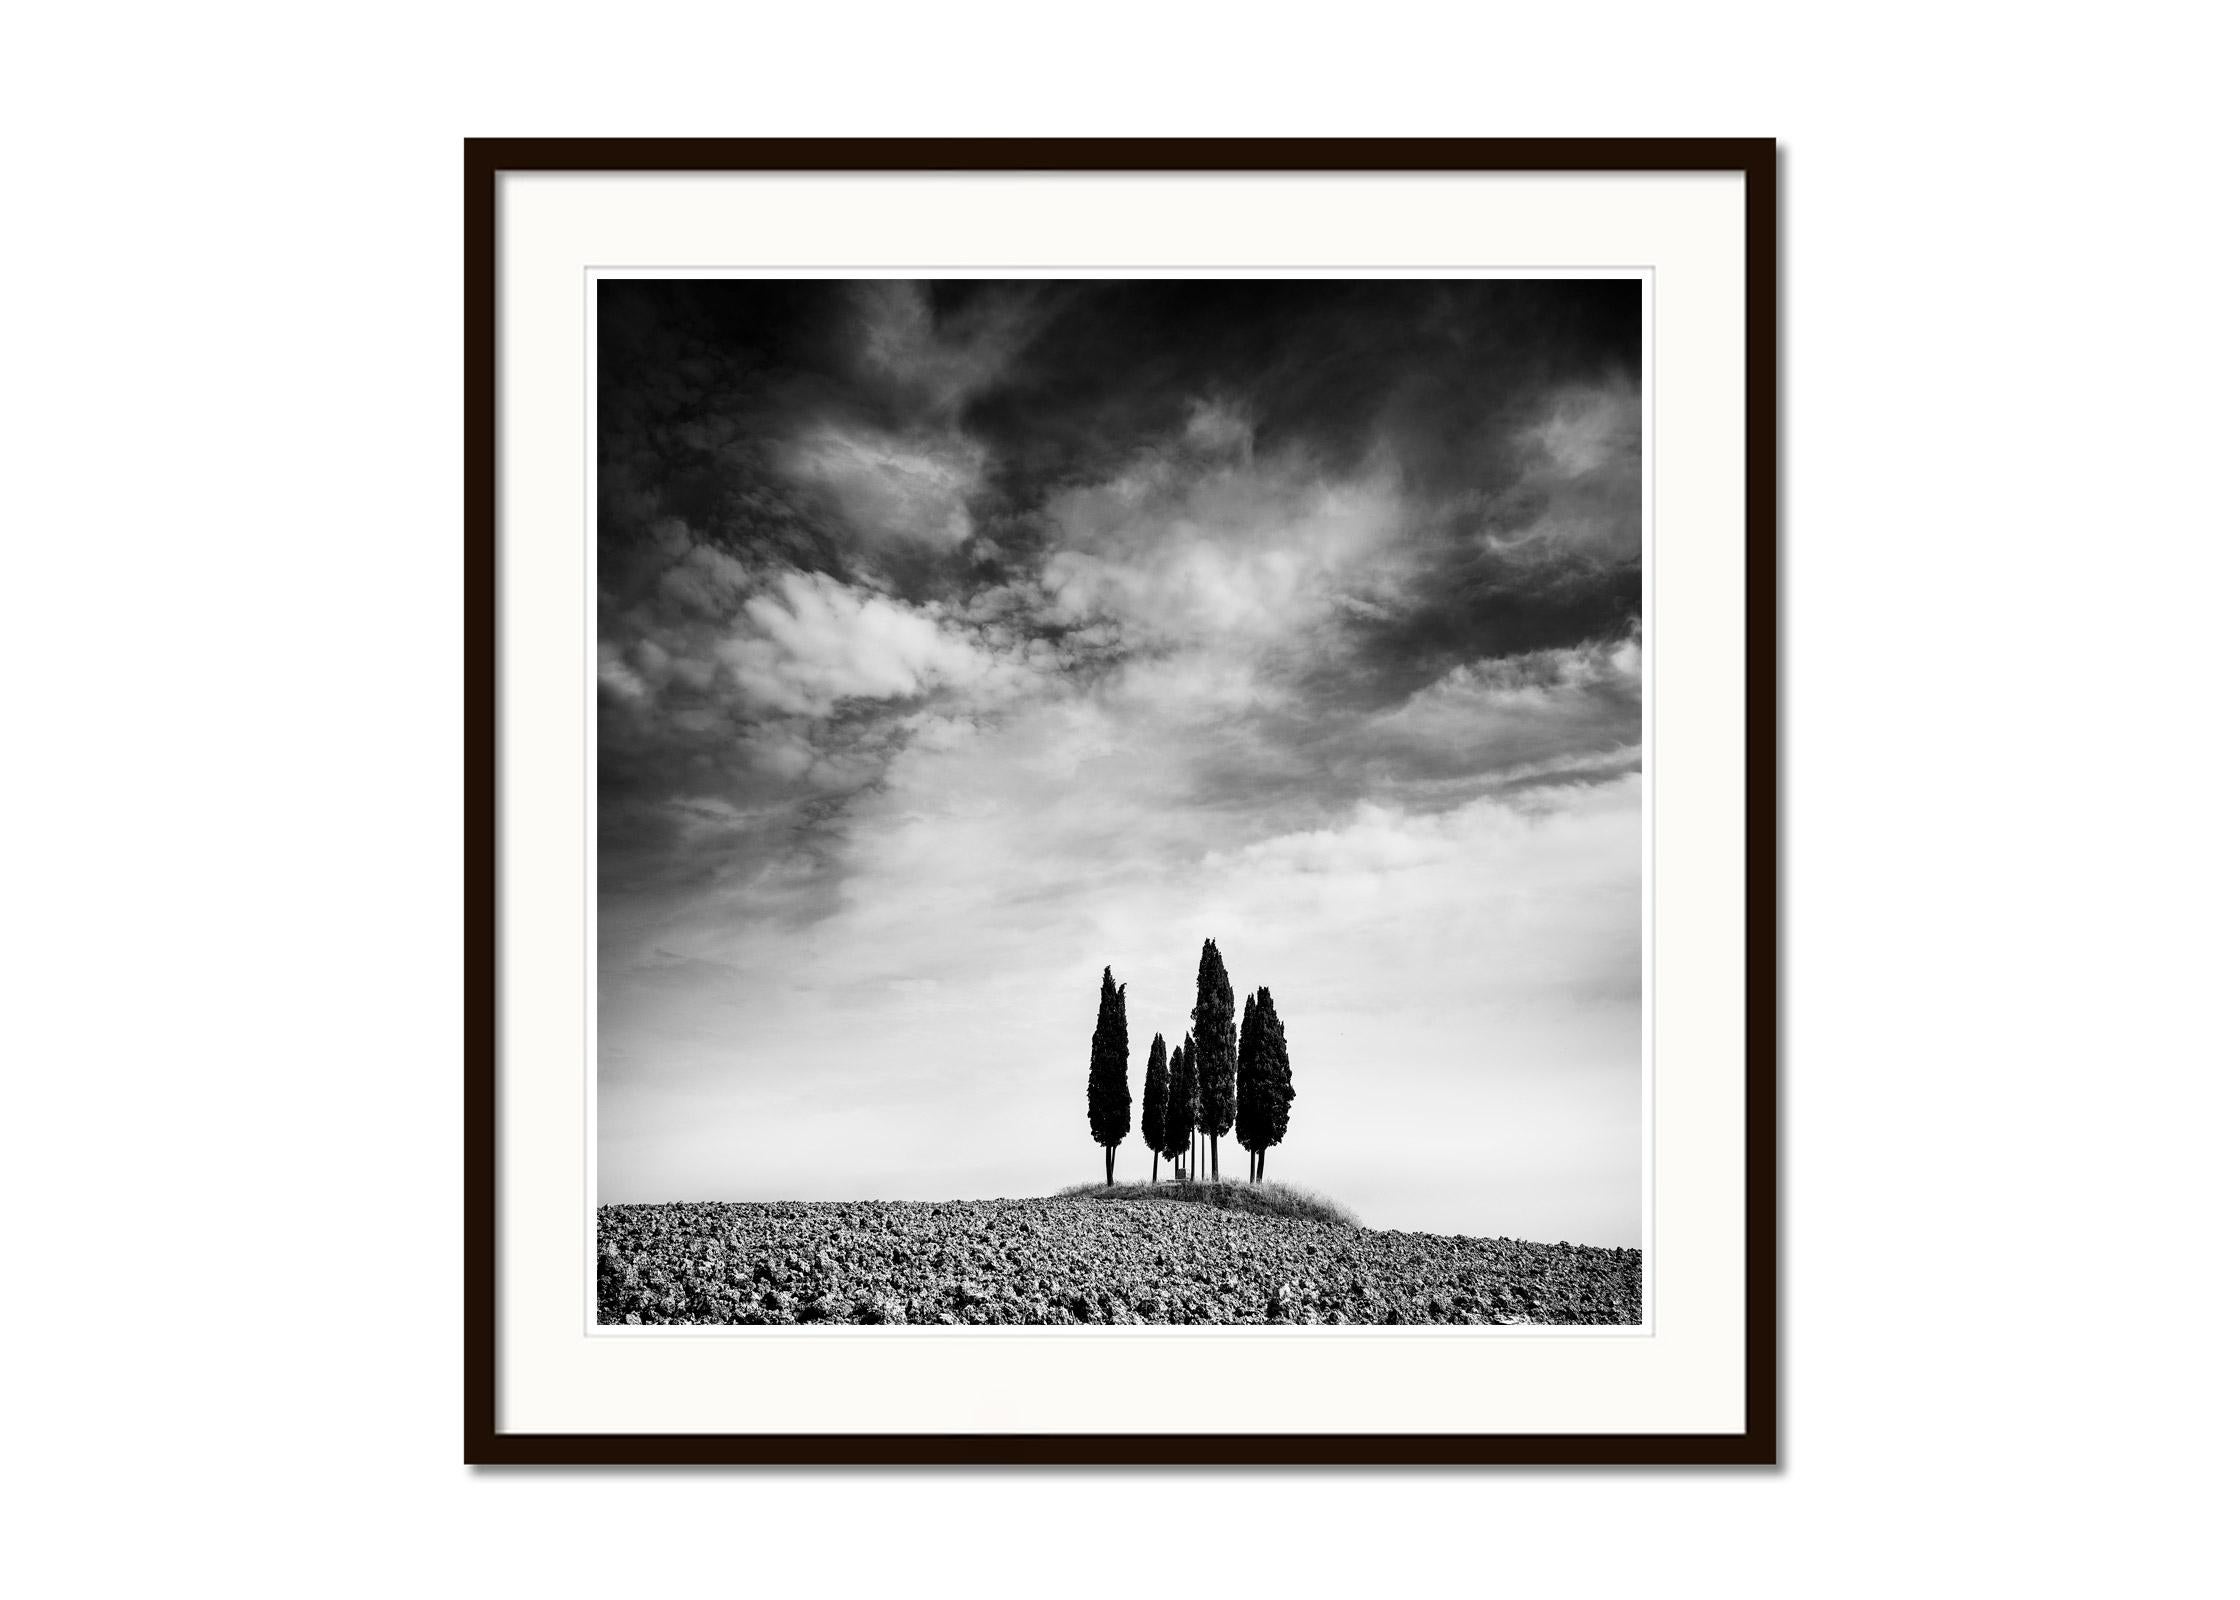 Black and white fine art landscape photography print. Cypresses circle on field with beautiful clouds in Tuscany, Italy. Archival pigment ink print, edition of 9. Signed, titled, dated and numbered by artist. Certificate of authenticity included.